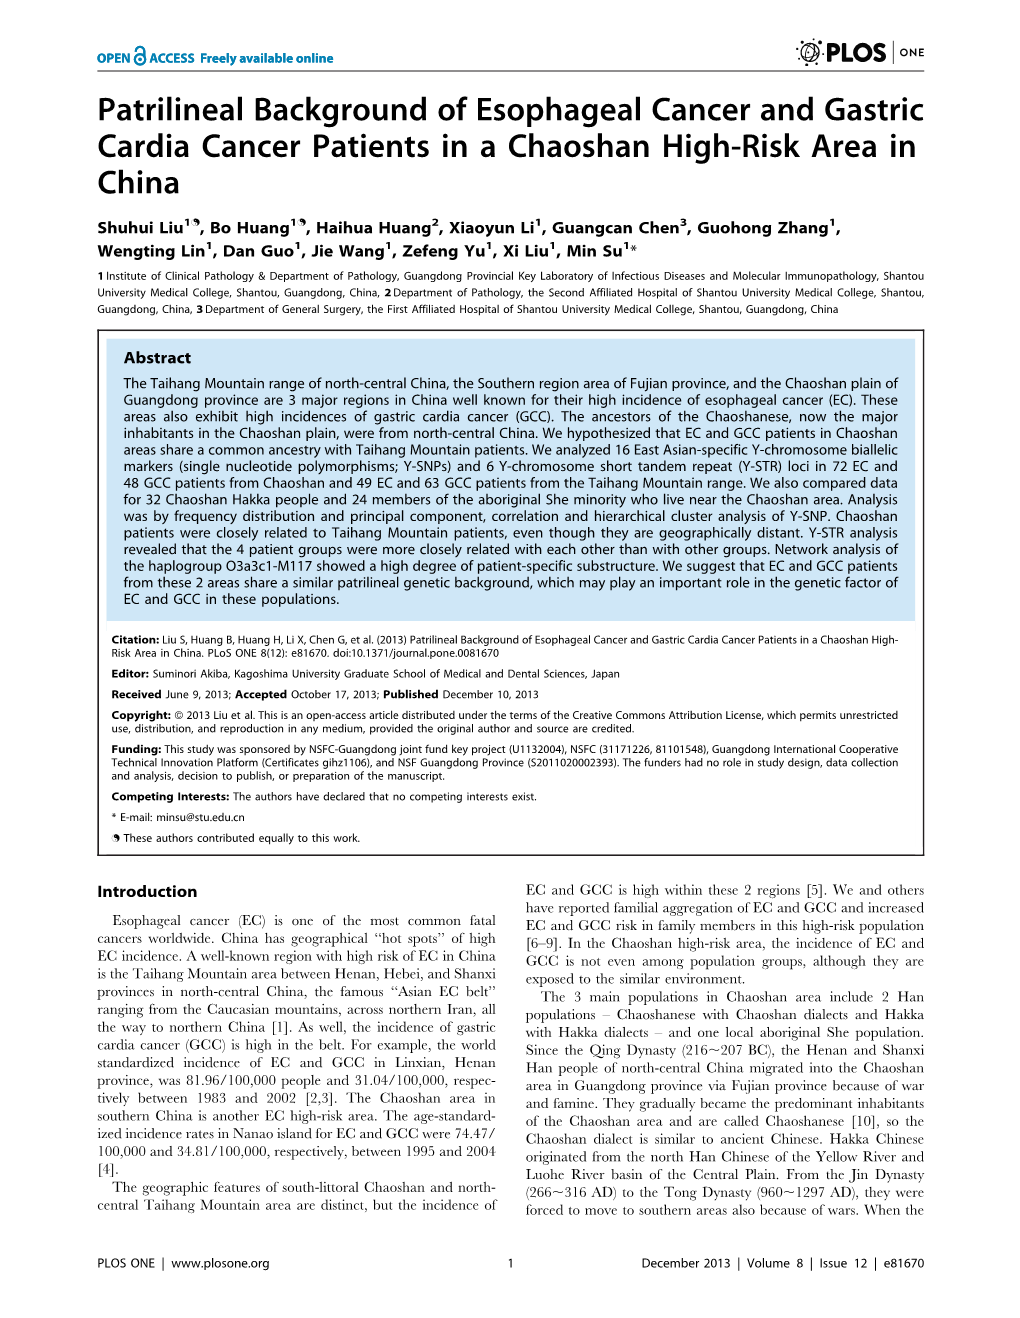 Patrilineal Background of Esophageal Cancer and Gastric Cardia Cancer Patients in a Chaoshan High-Risk Area in China